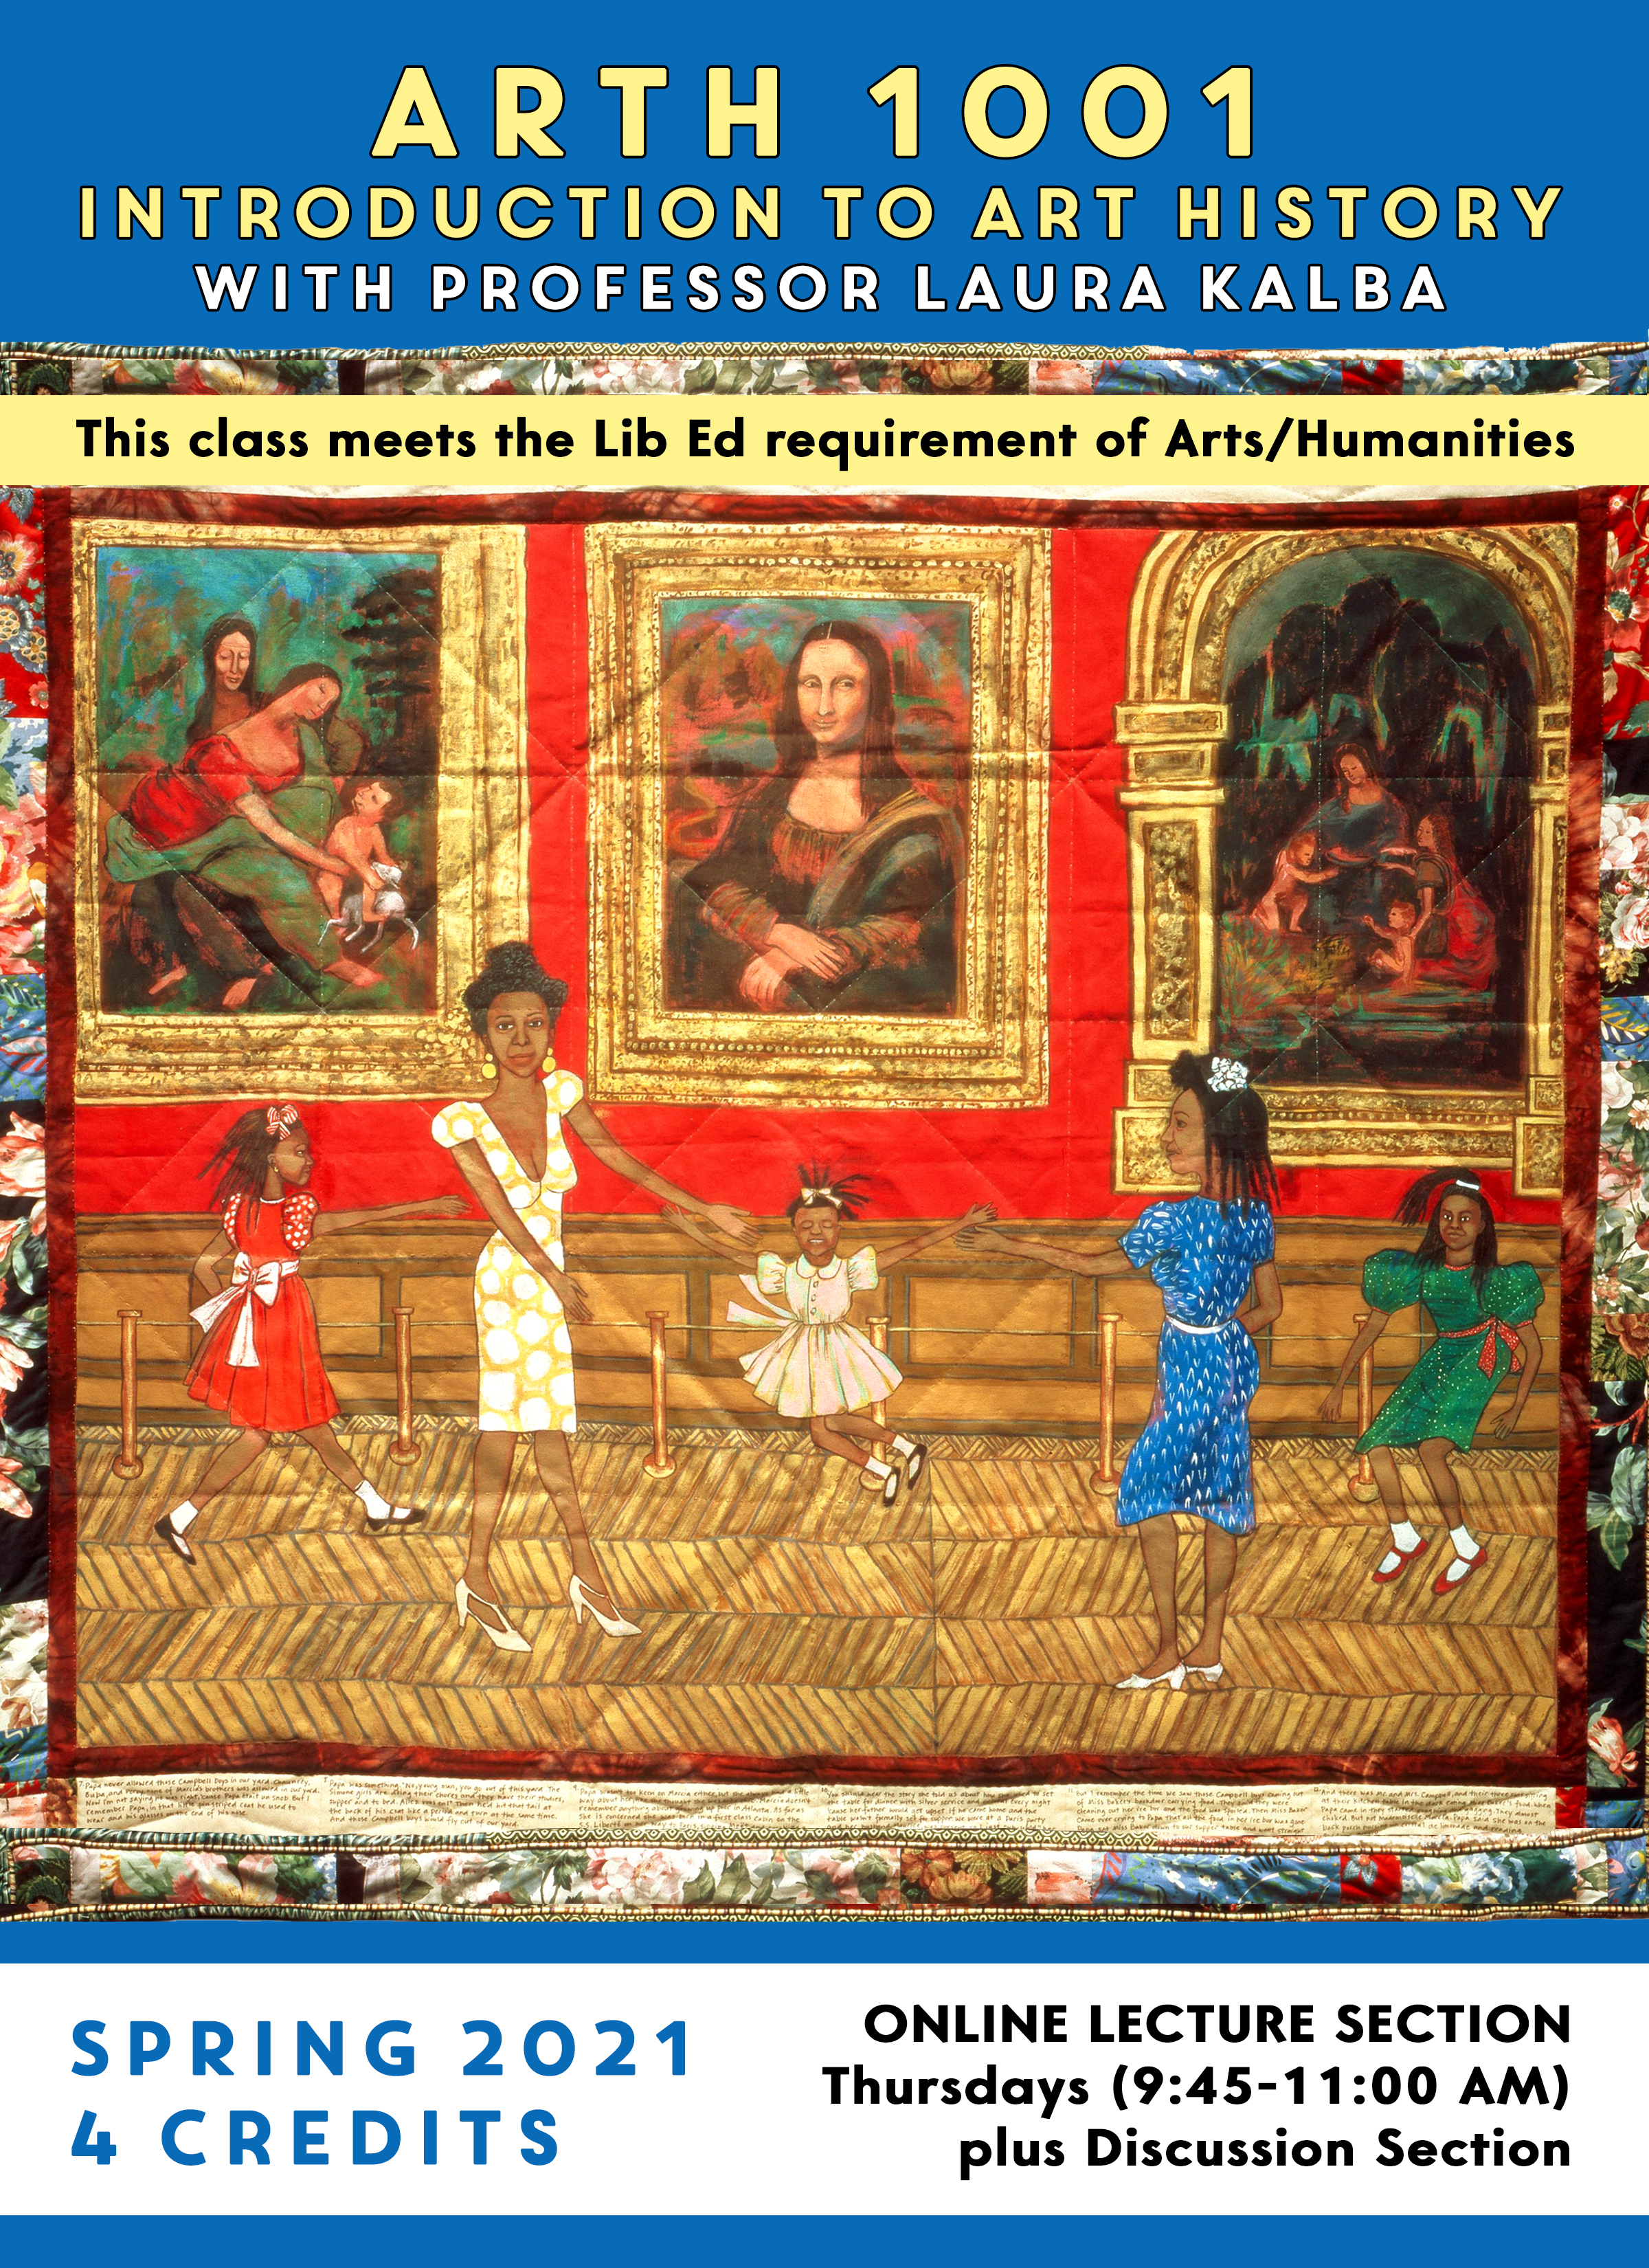 Course poster for ARTH 1001 Intro to Art History with Professor Laura Kalba. Image is Faith Ringgold’s "Dancing at the Louvre." The course is online and is 4 credits. Thursdays from 9:45am-11am, plus discussion section